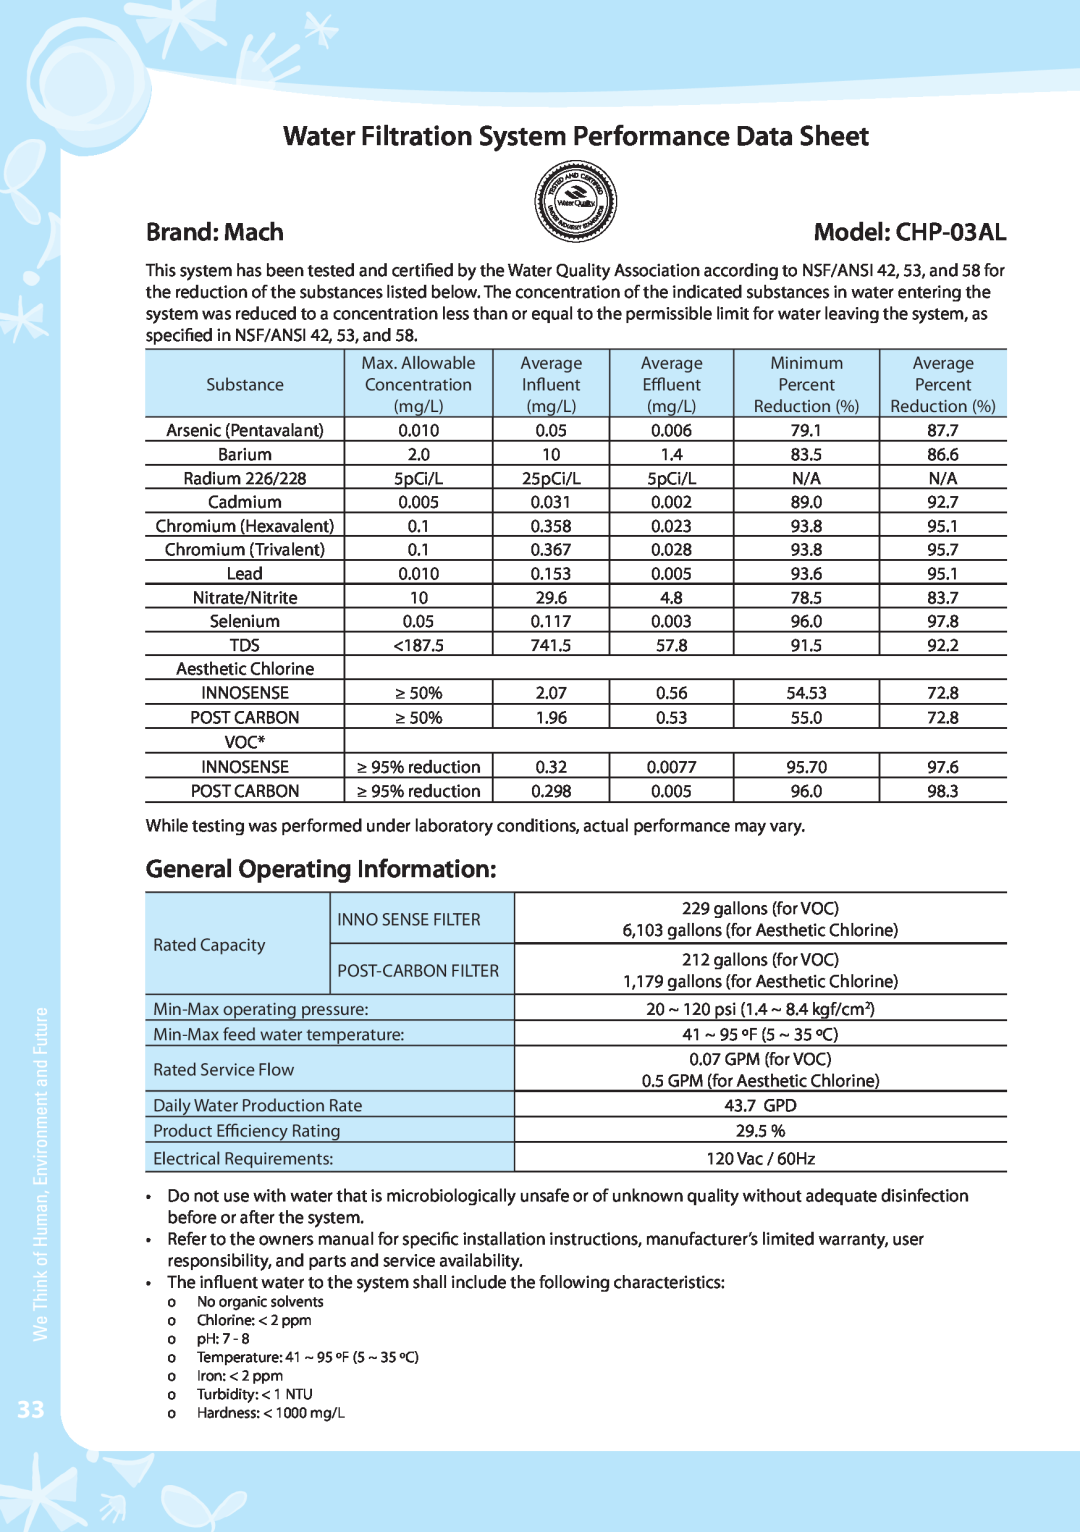 Coway CHP-03AR Model: CHP-03AL, Water Filtration System Performance Data Sheet, Brand: Mach, General Operating Information 